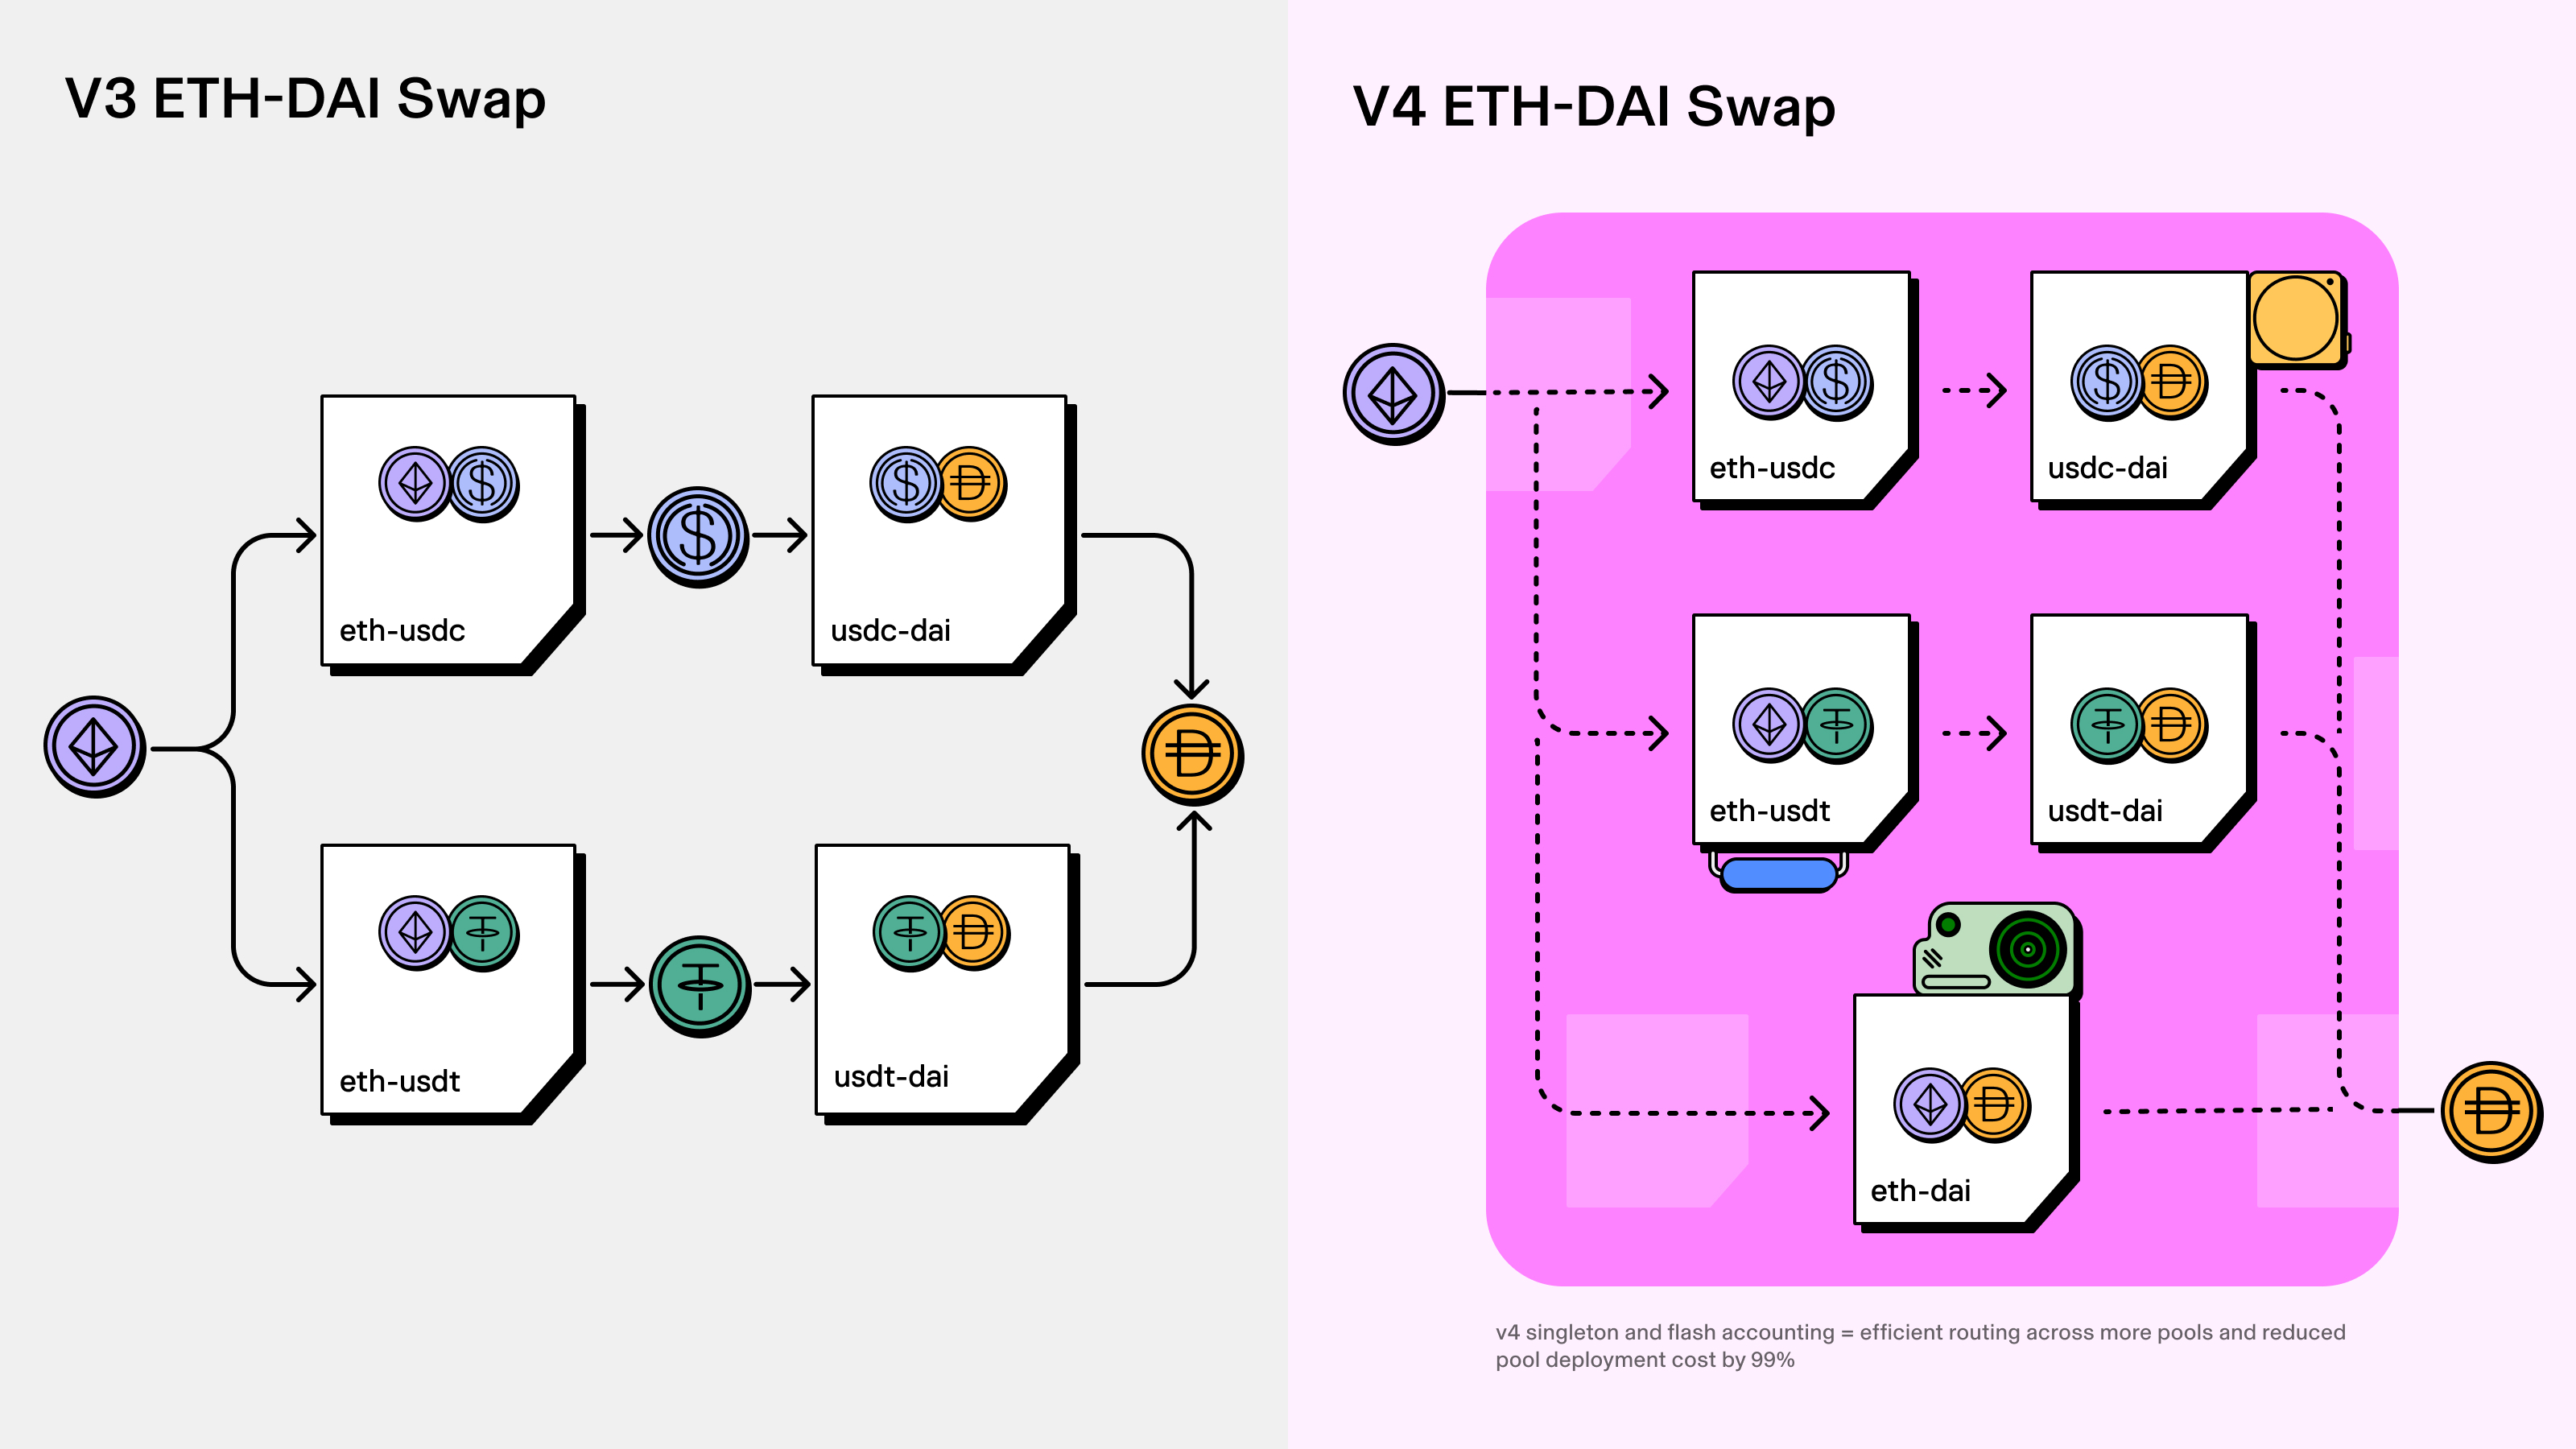 Image of how Uniswap v4 achieves more efficiency by combining Singleton and Flash accounting features.